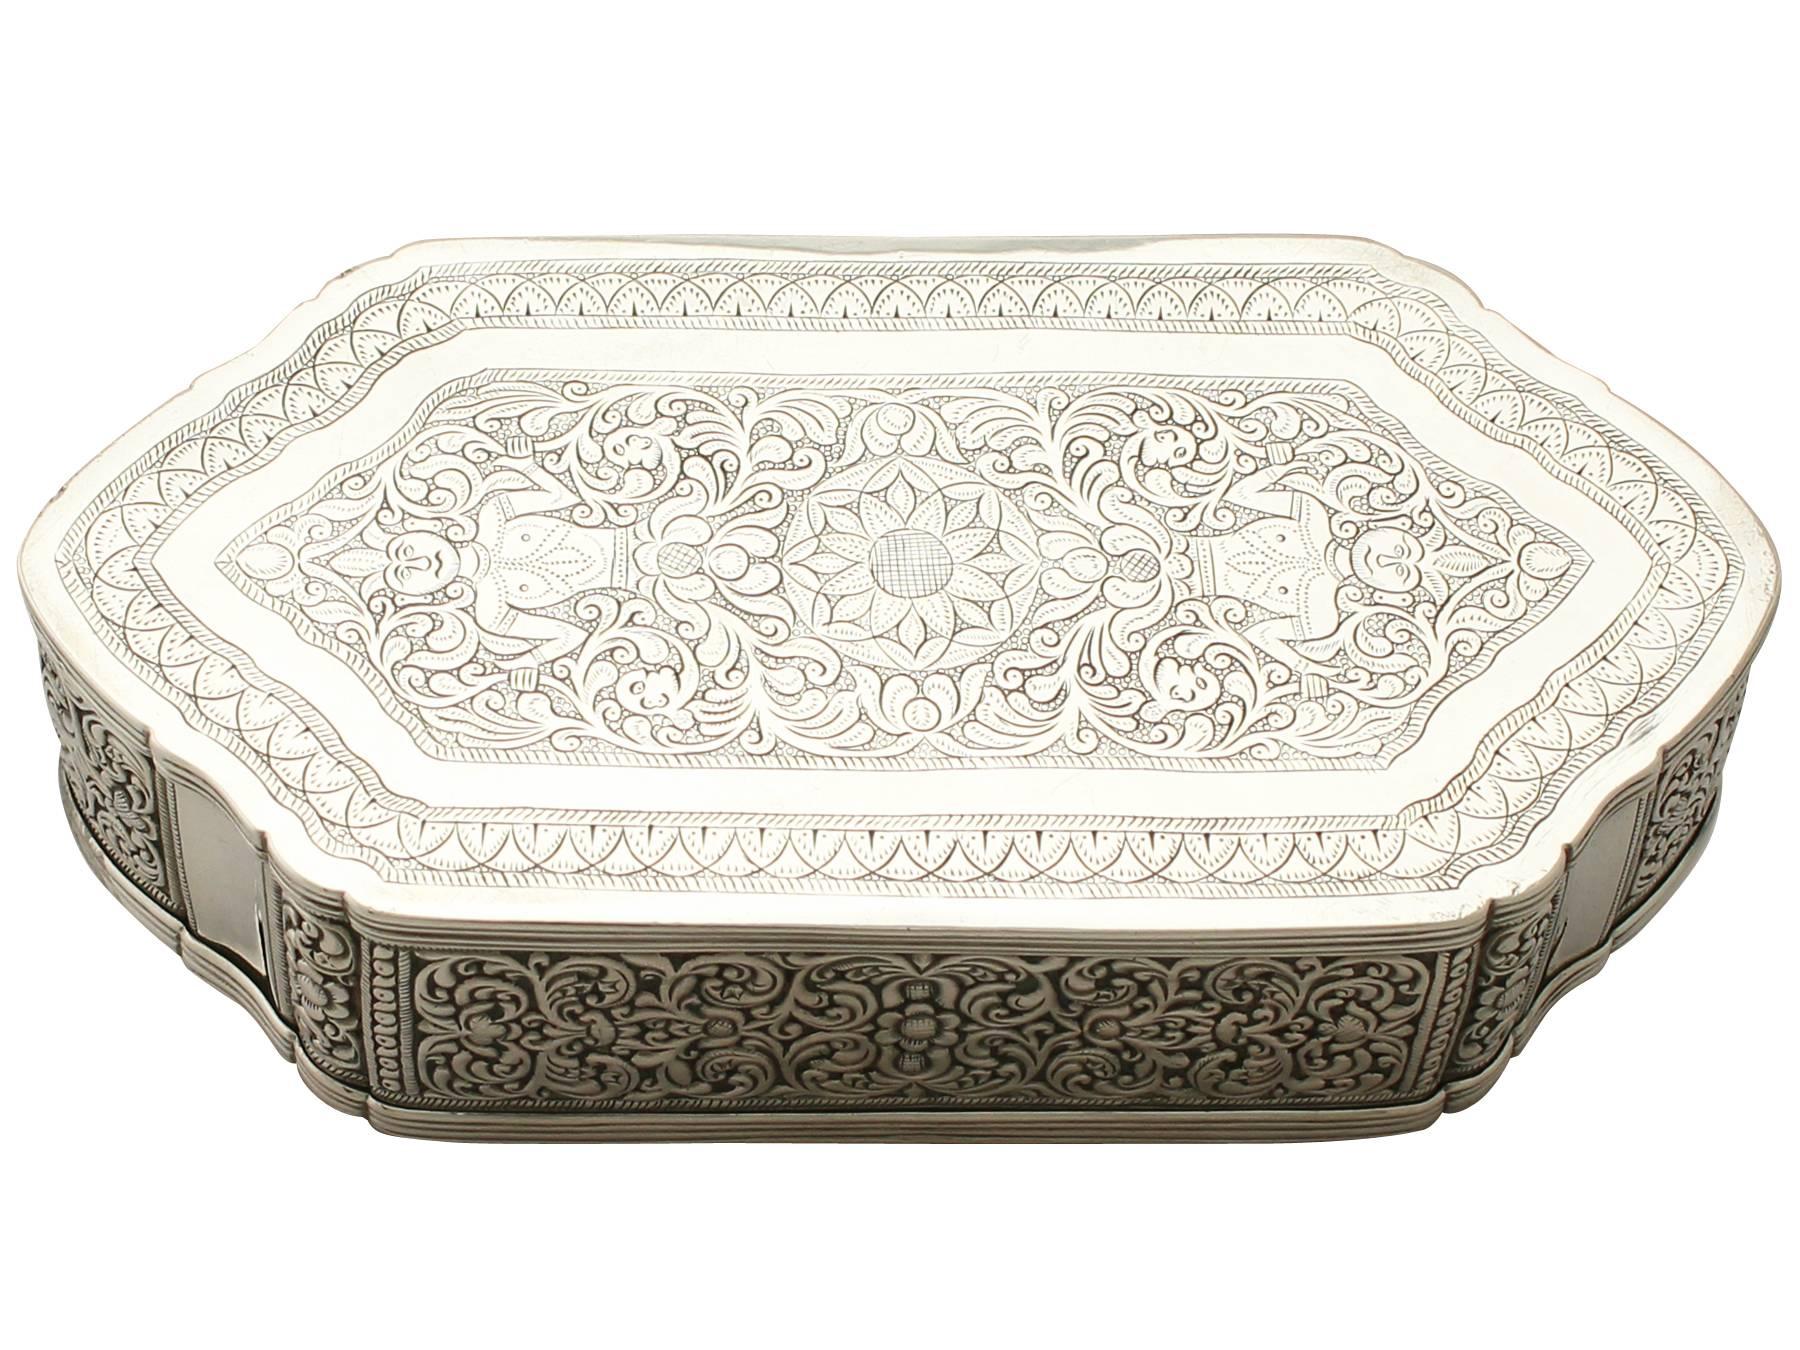 A fine and impressive antique Indian silver box; an addition to our diverse Asian silverware collection.

This fine antique Indian silver box has an irregular hexagonal shaped form with one line of symmetry and shaped rounded ends.

The body of